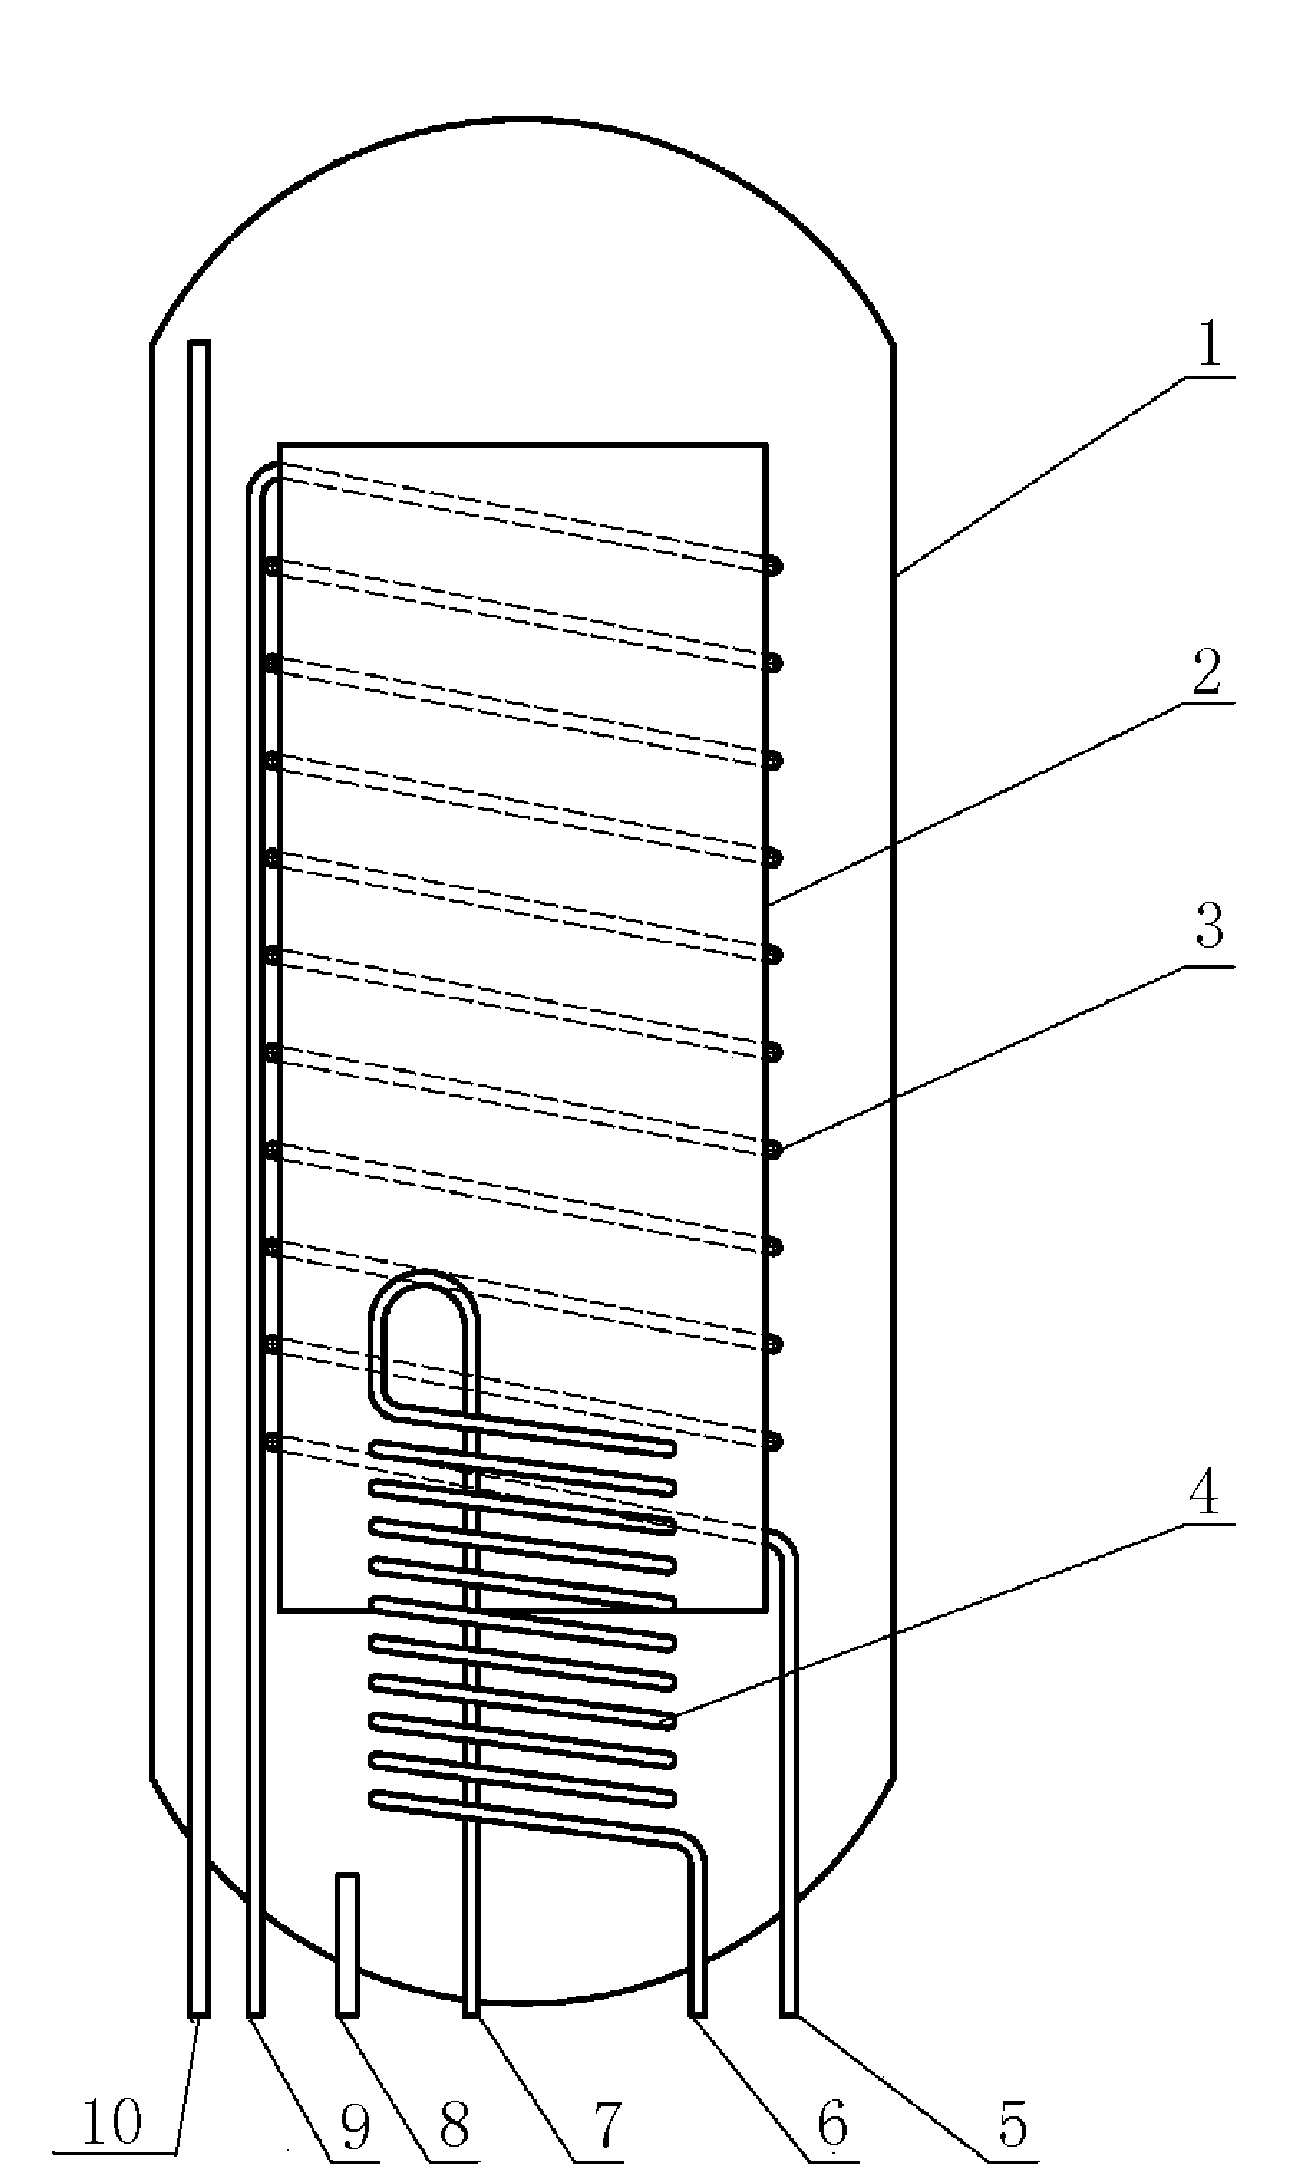 Heat exchange and flow guide structure of hot water storage tank